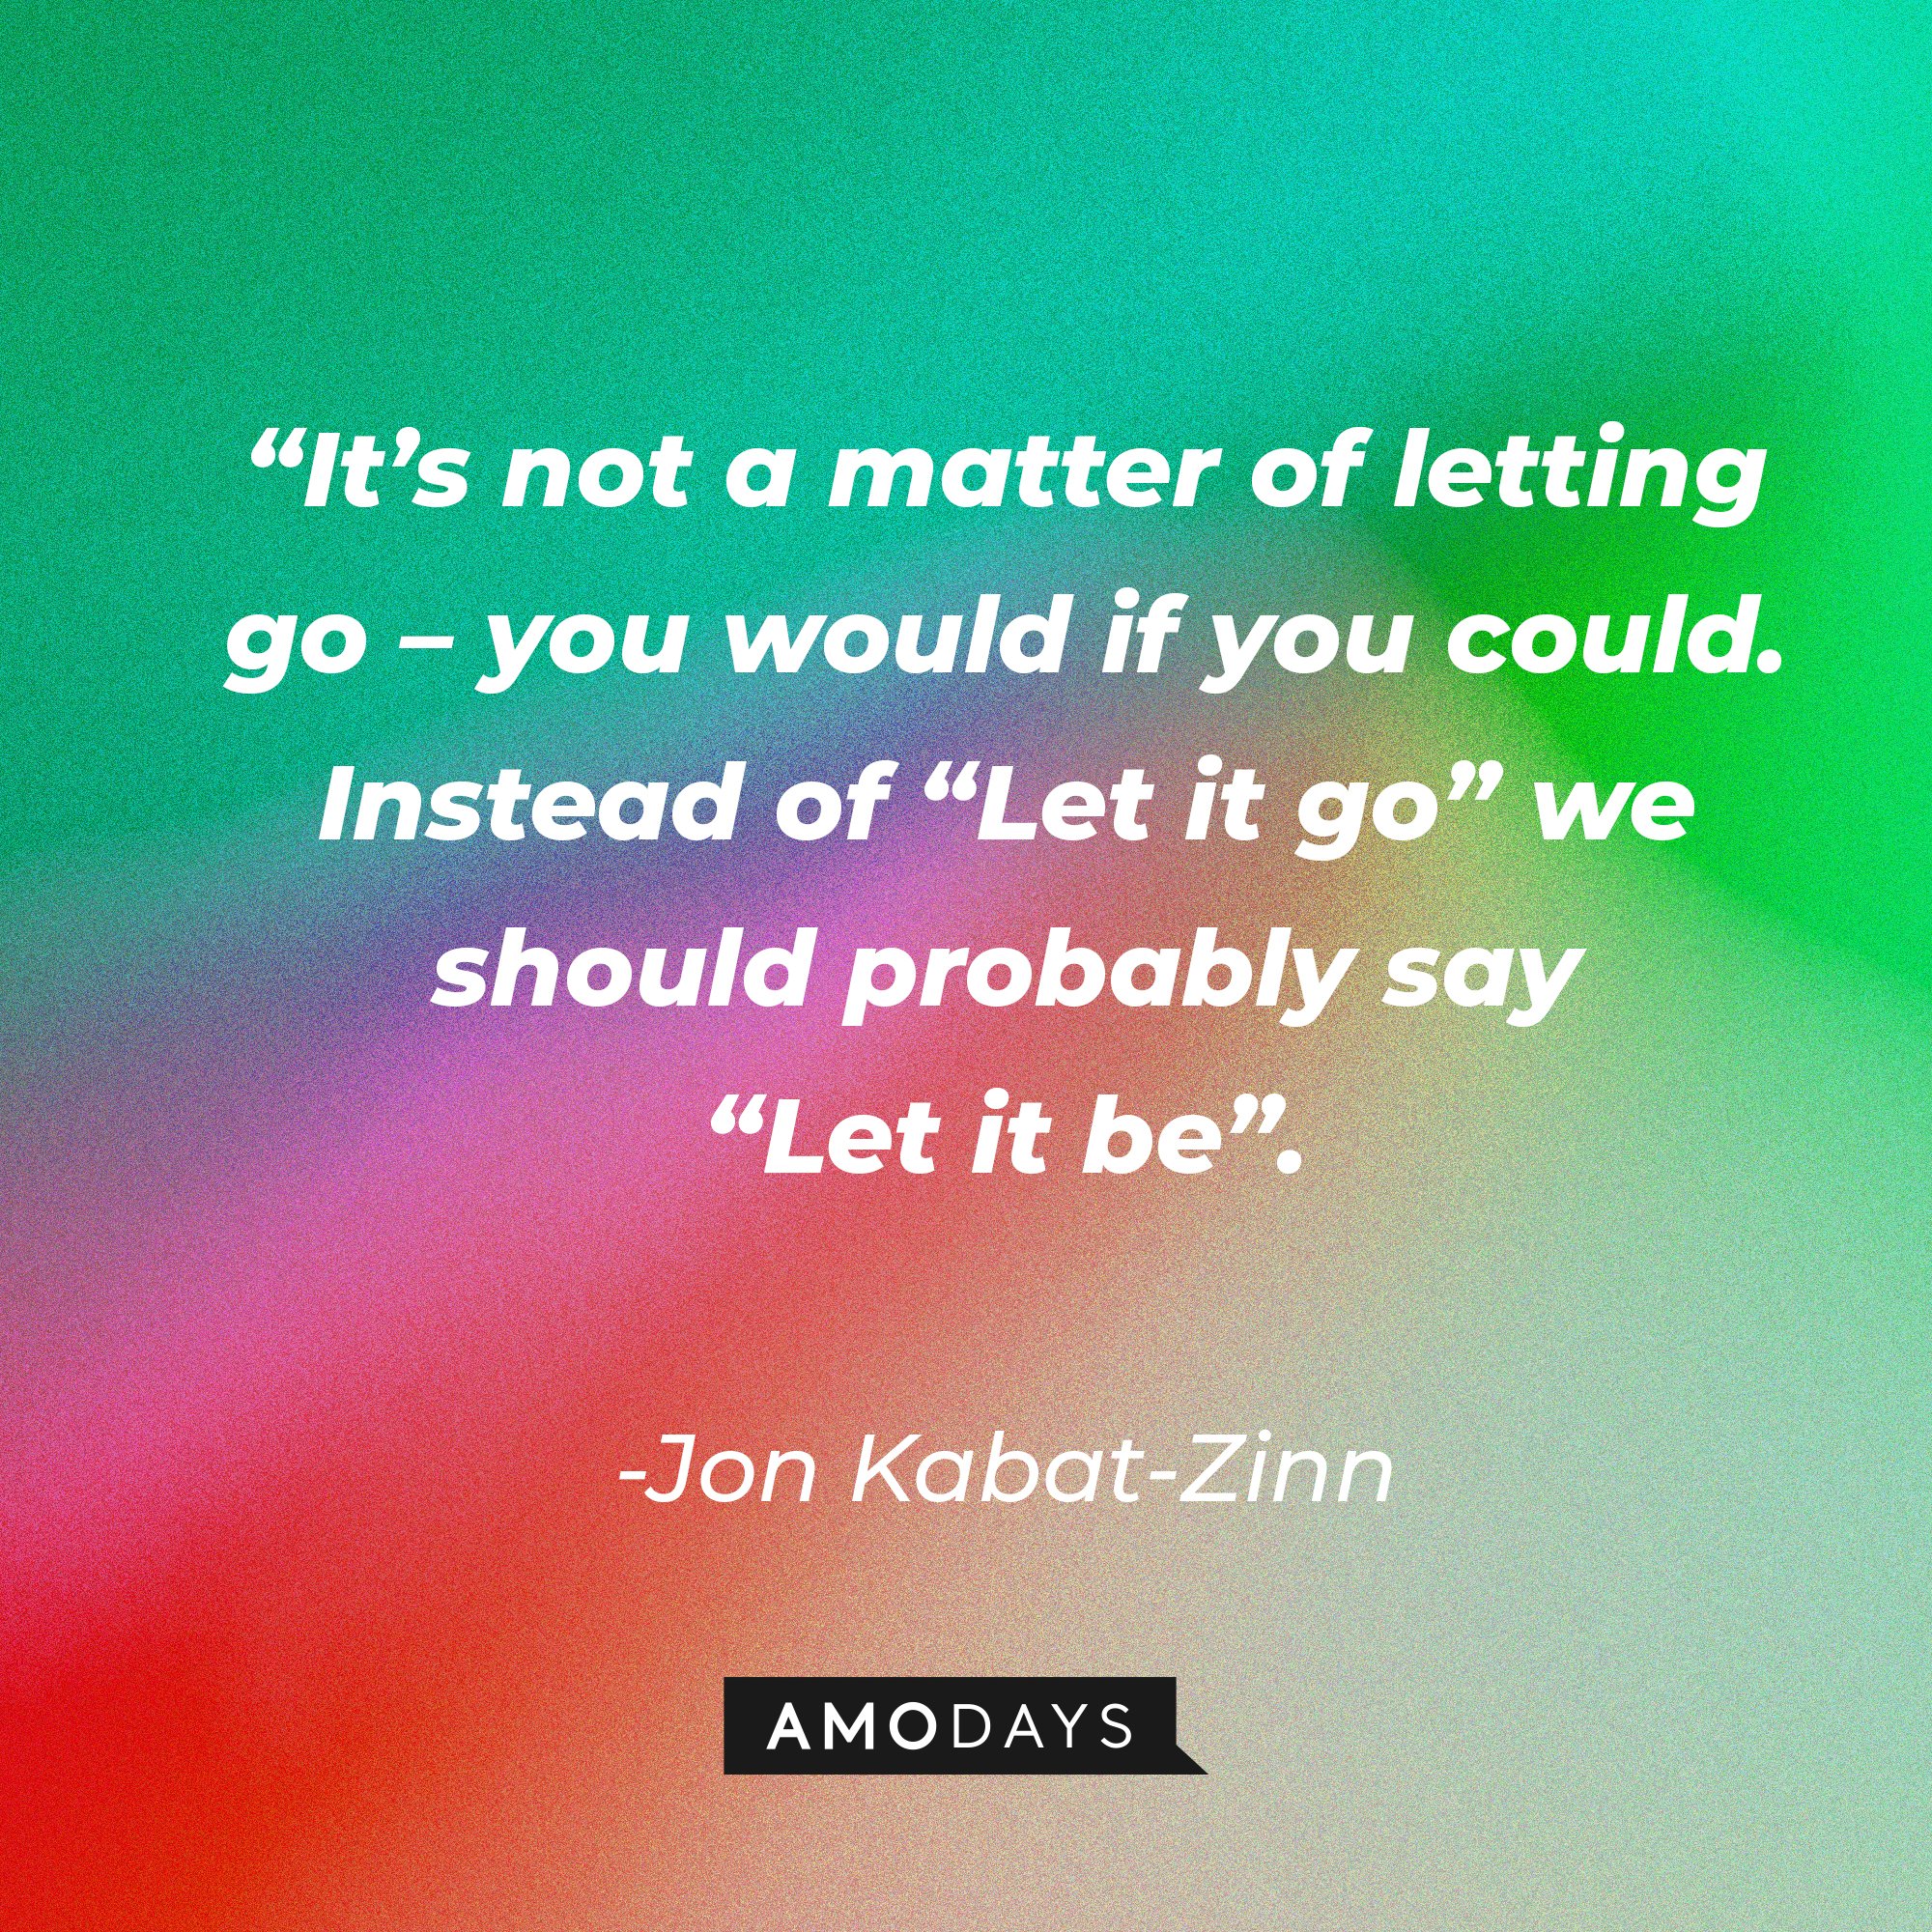 Jon Kabat-Zinn's quote: “It’s not a matter of letting go – you would if you could. Instead of “Let it go” we should probably say “Let it be”. |Image: AmoDays